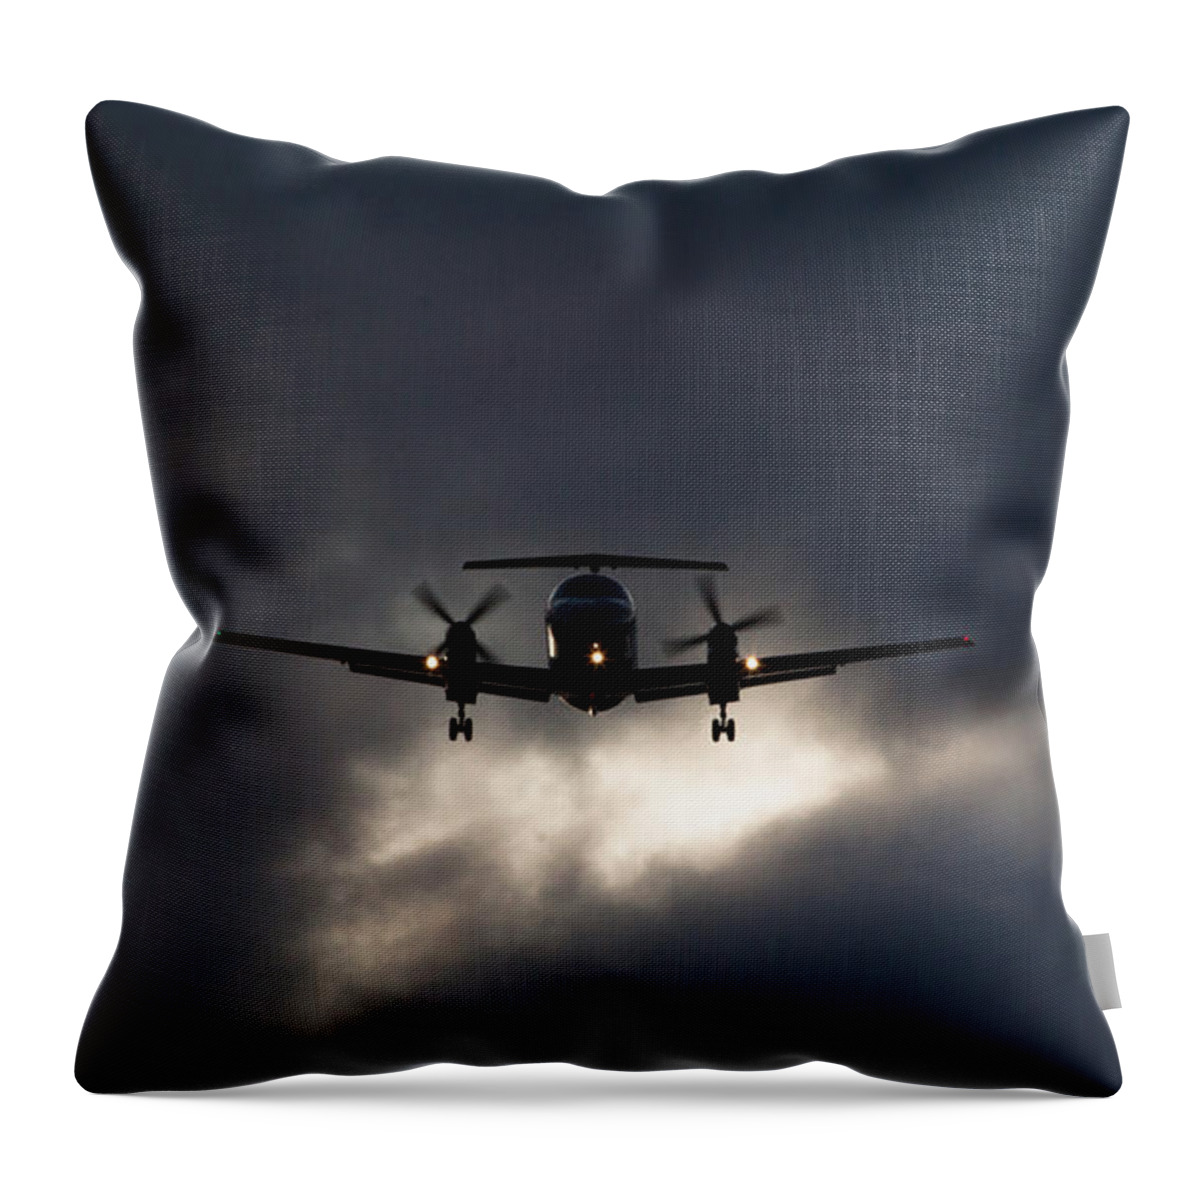 Skywest Throw Pillow featuring the photograph Brasilia Breakout by John Daly